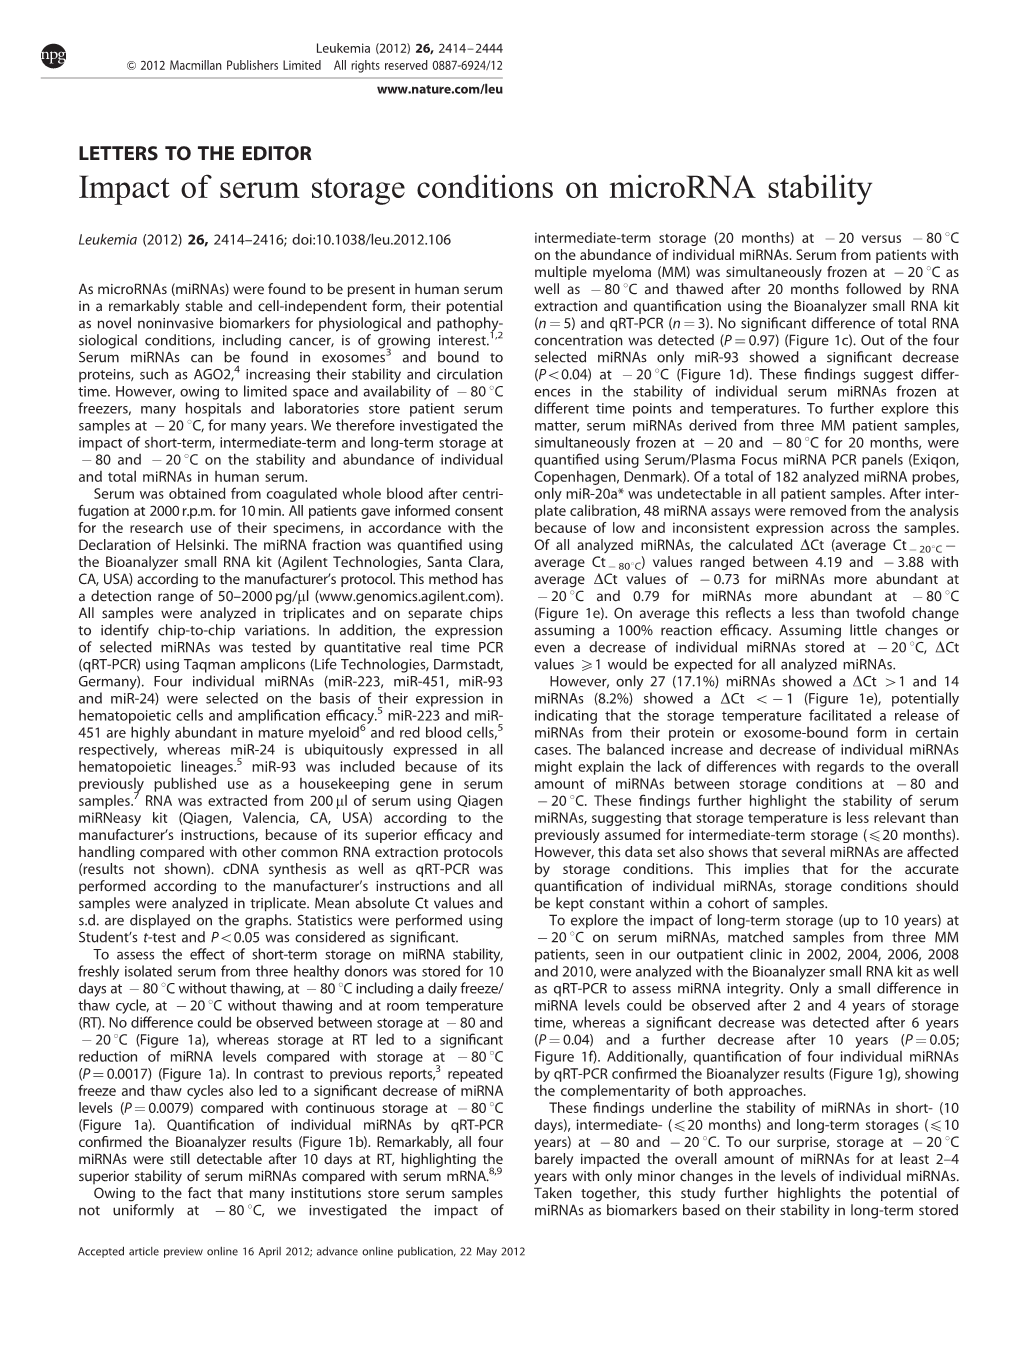 Impact of Serum Storage Conditions on Microrna Stability